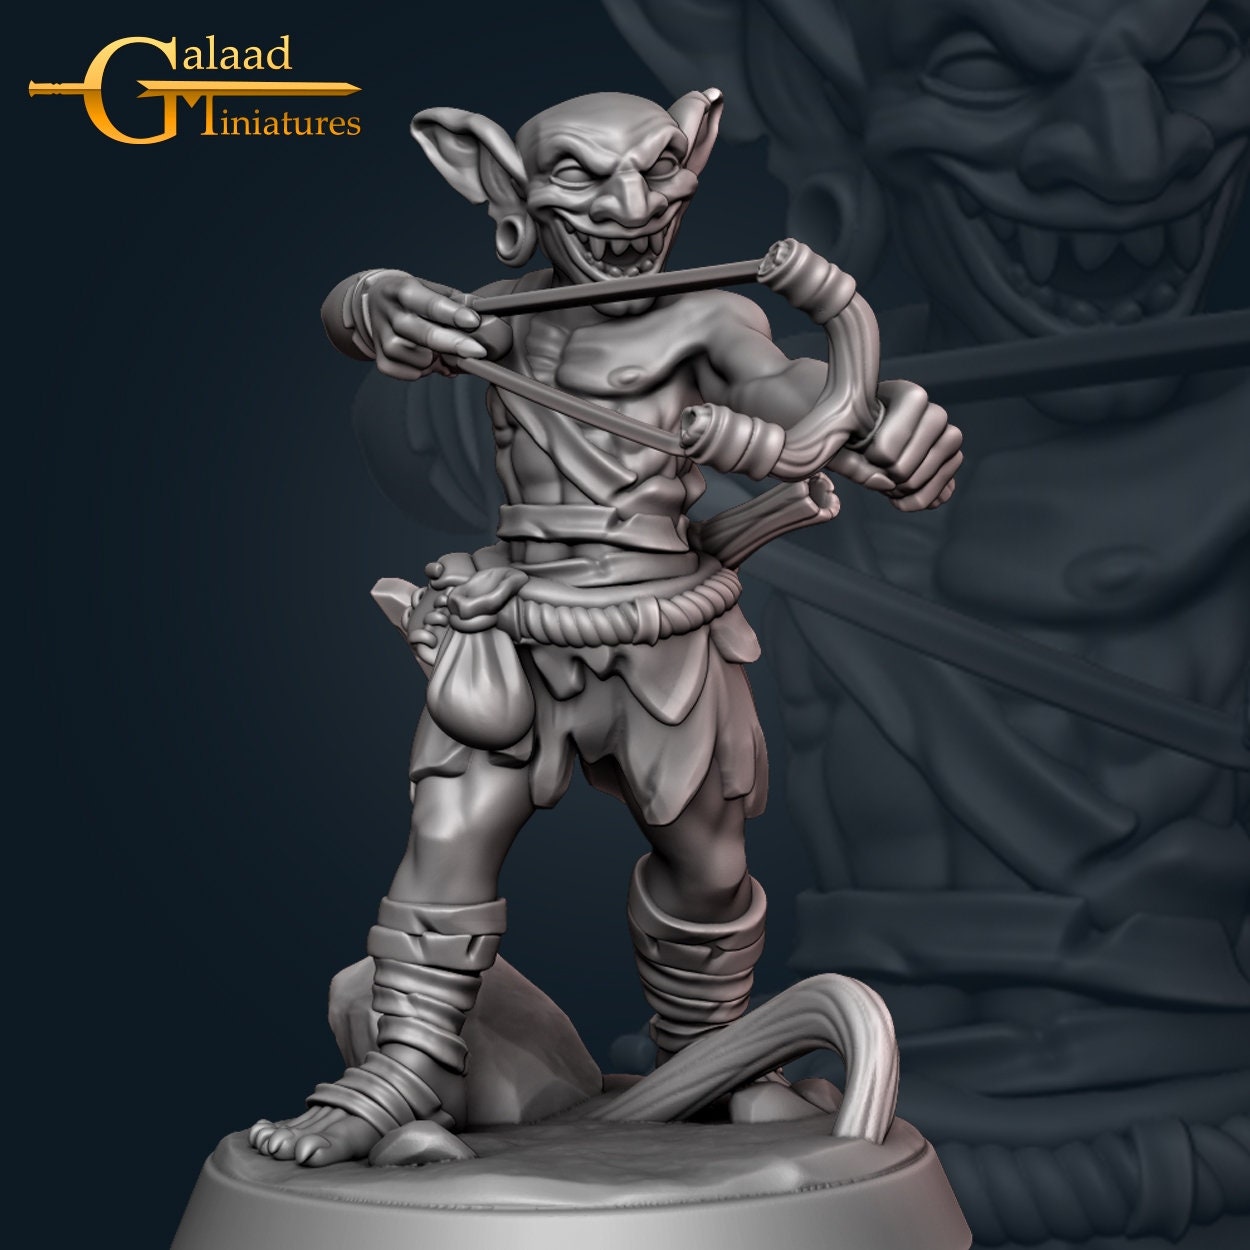 Goblin Fighter with Slingshot D&D miniature, by Galaad Miniatures // 3D Print on Demand / DnD / Pathfinder / RPG